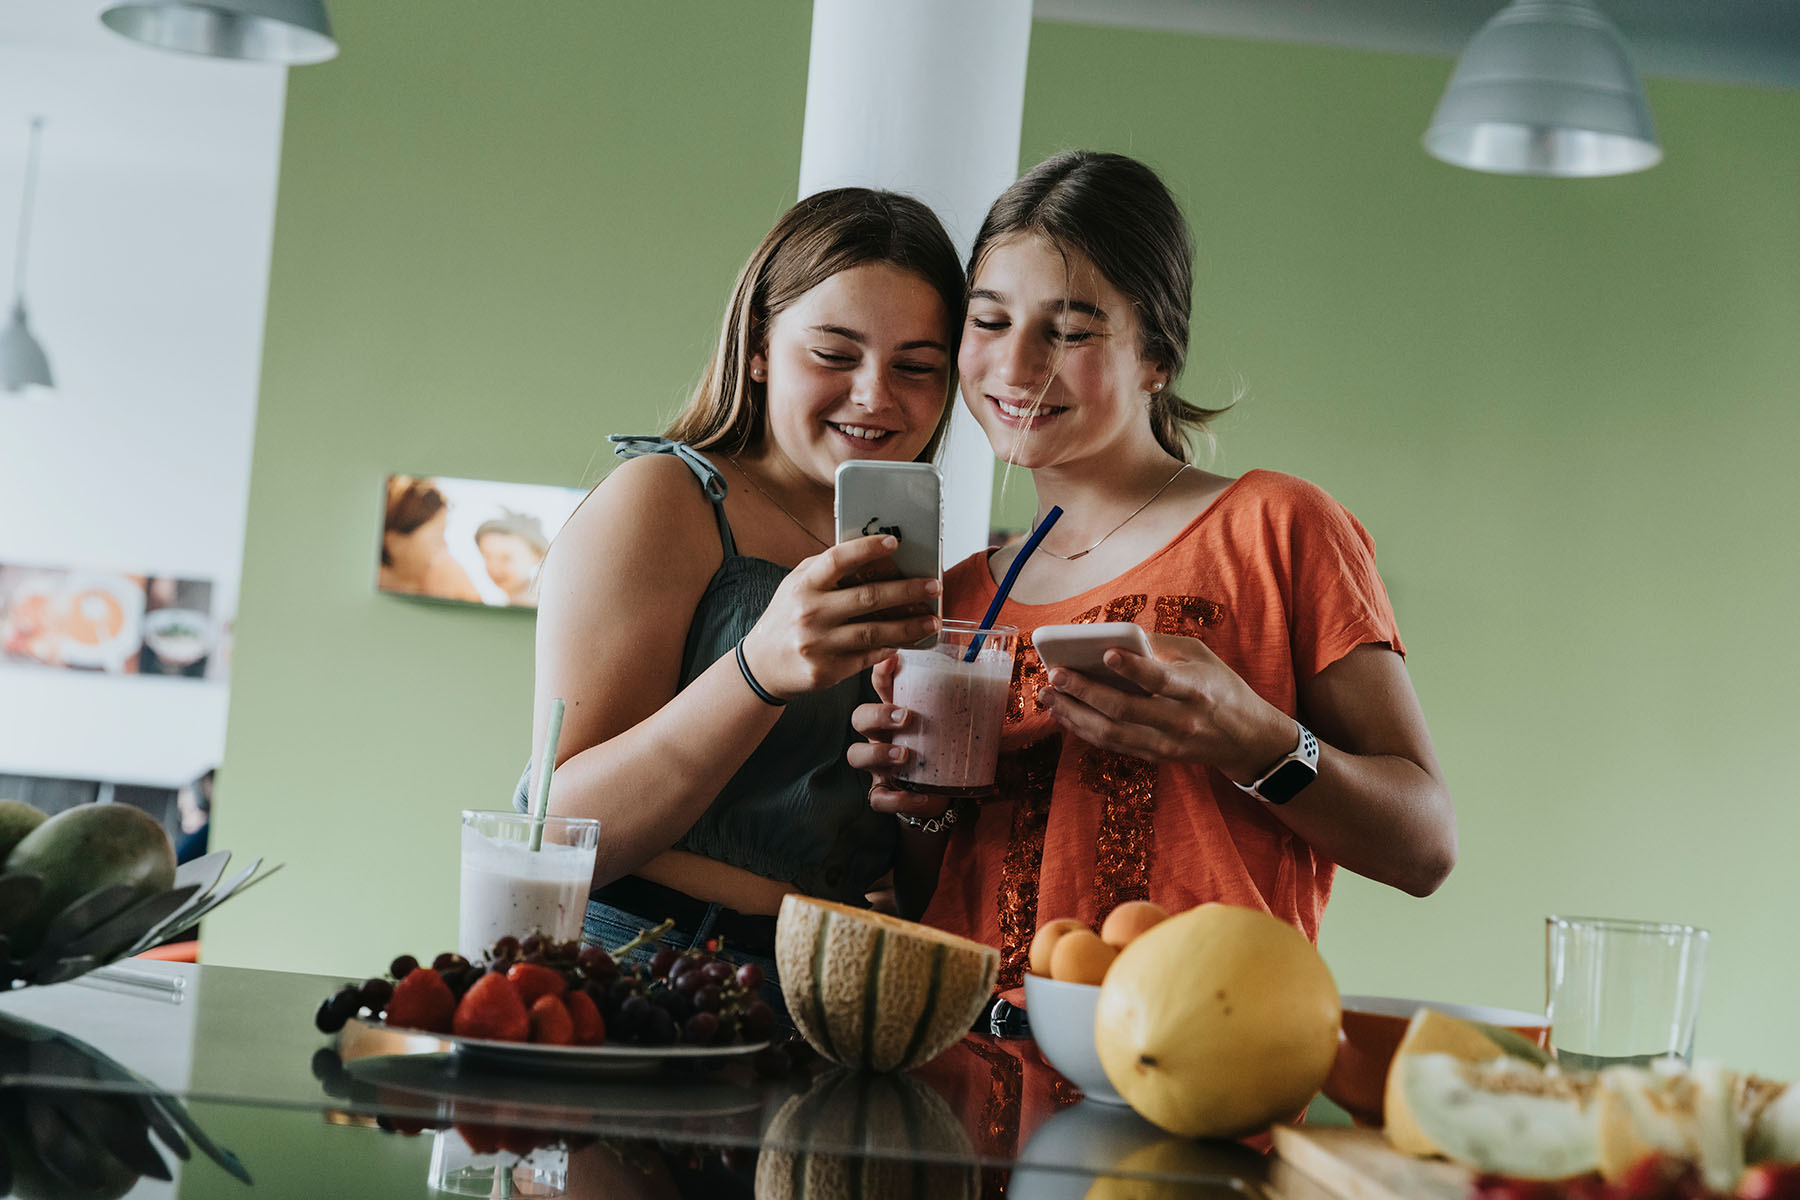 Two girls smiling as the enjoy homemade fruit smoothies and share cell phone photos.